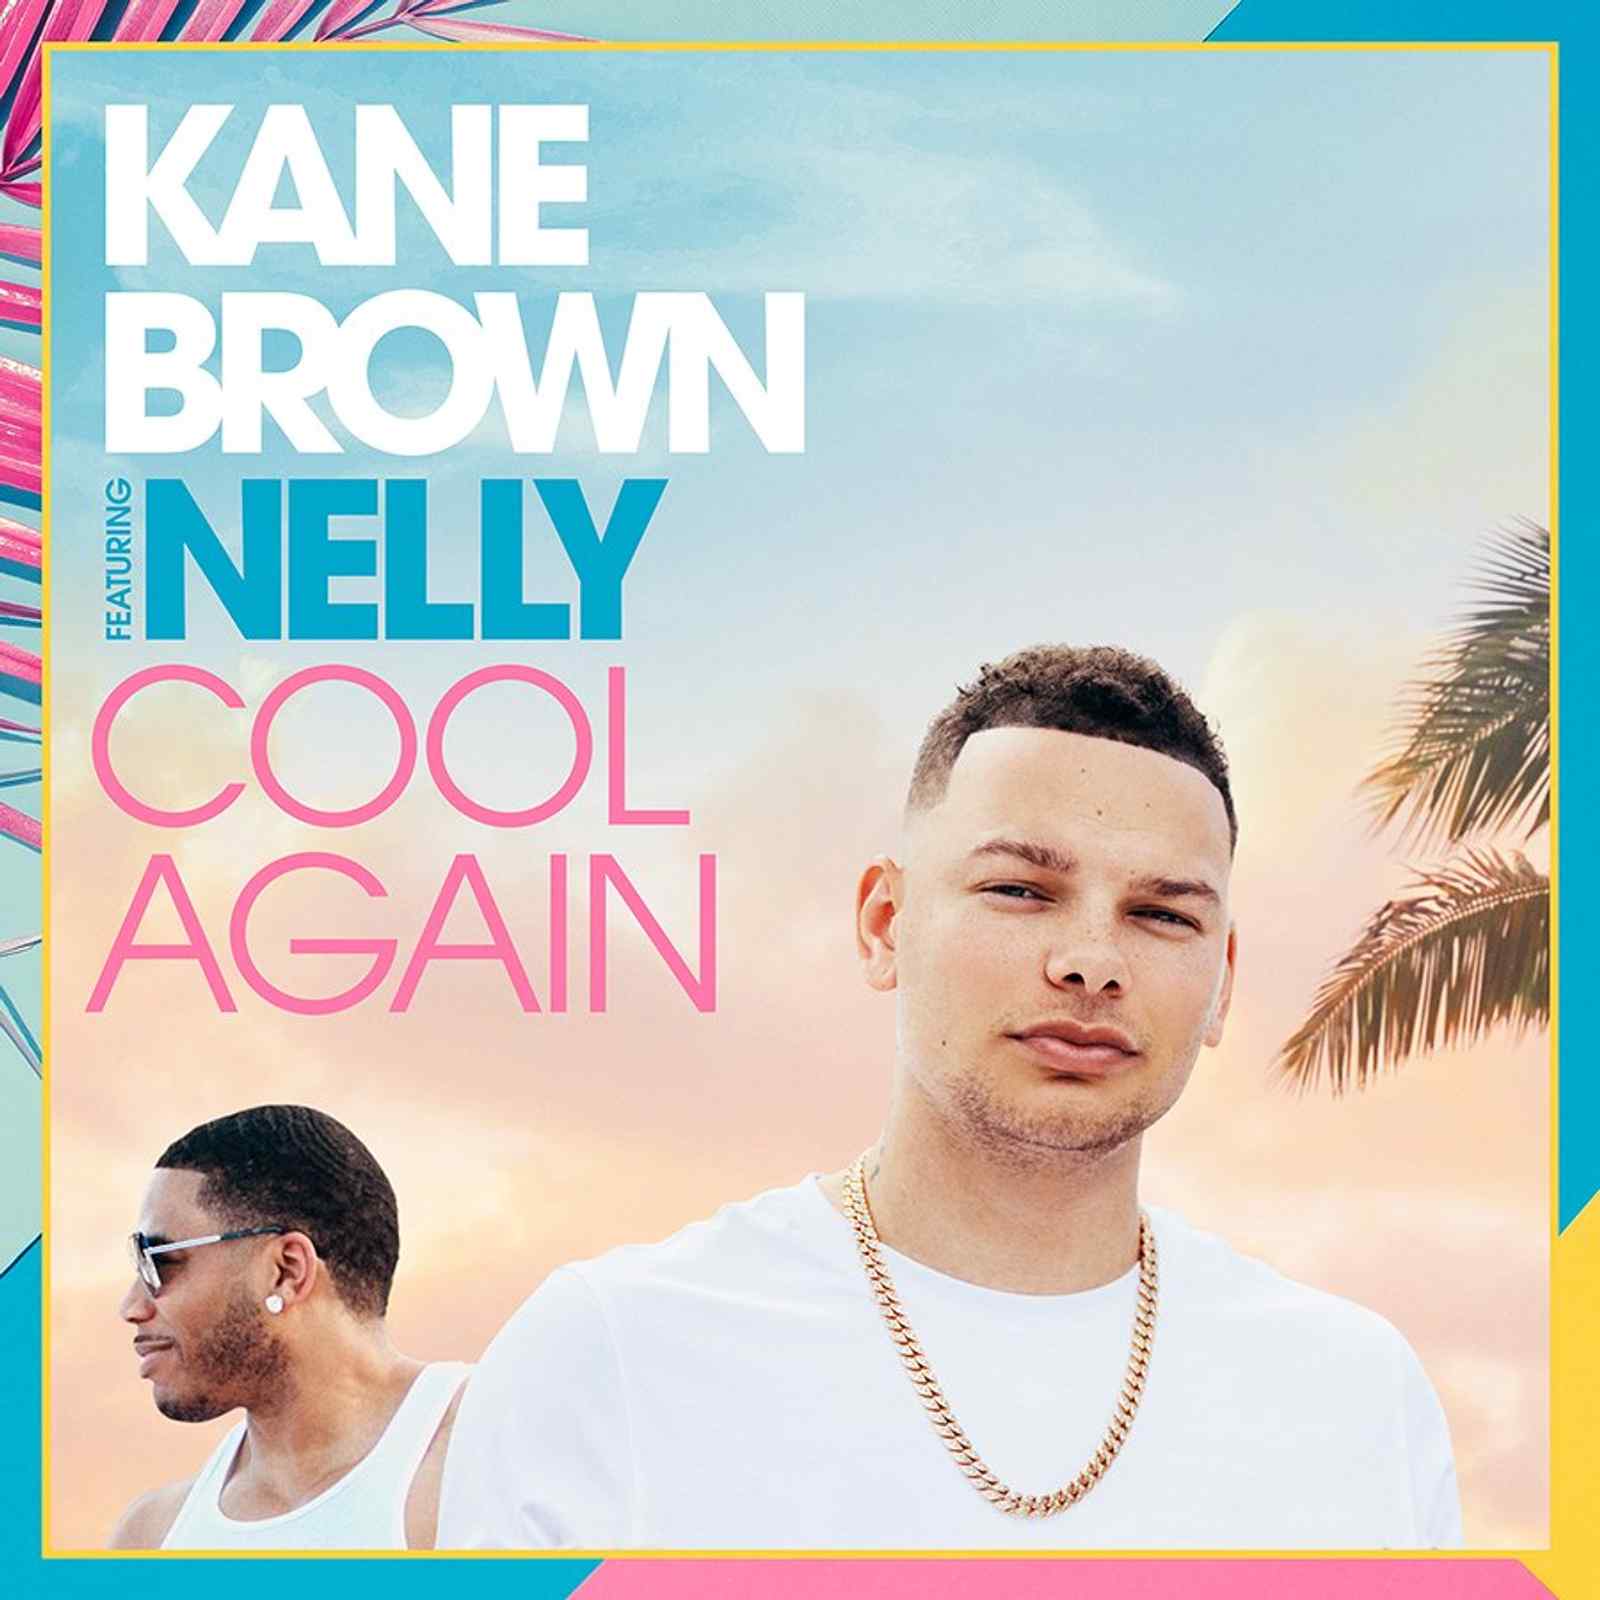 Song Release: "Cool Again (feat Nelly)" by Kane Brown